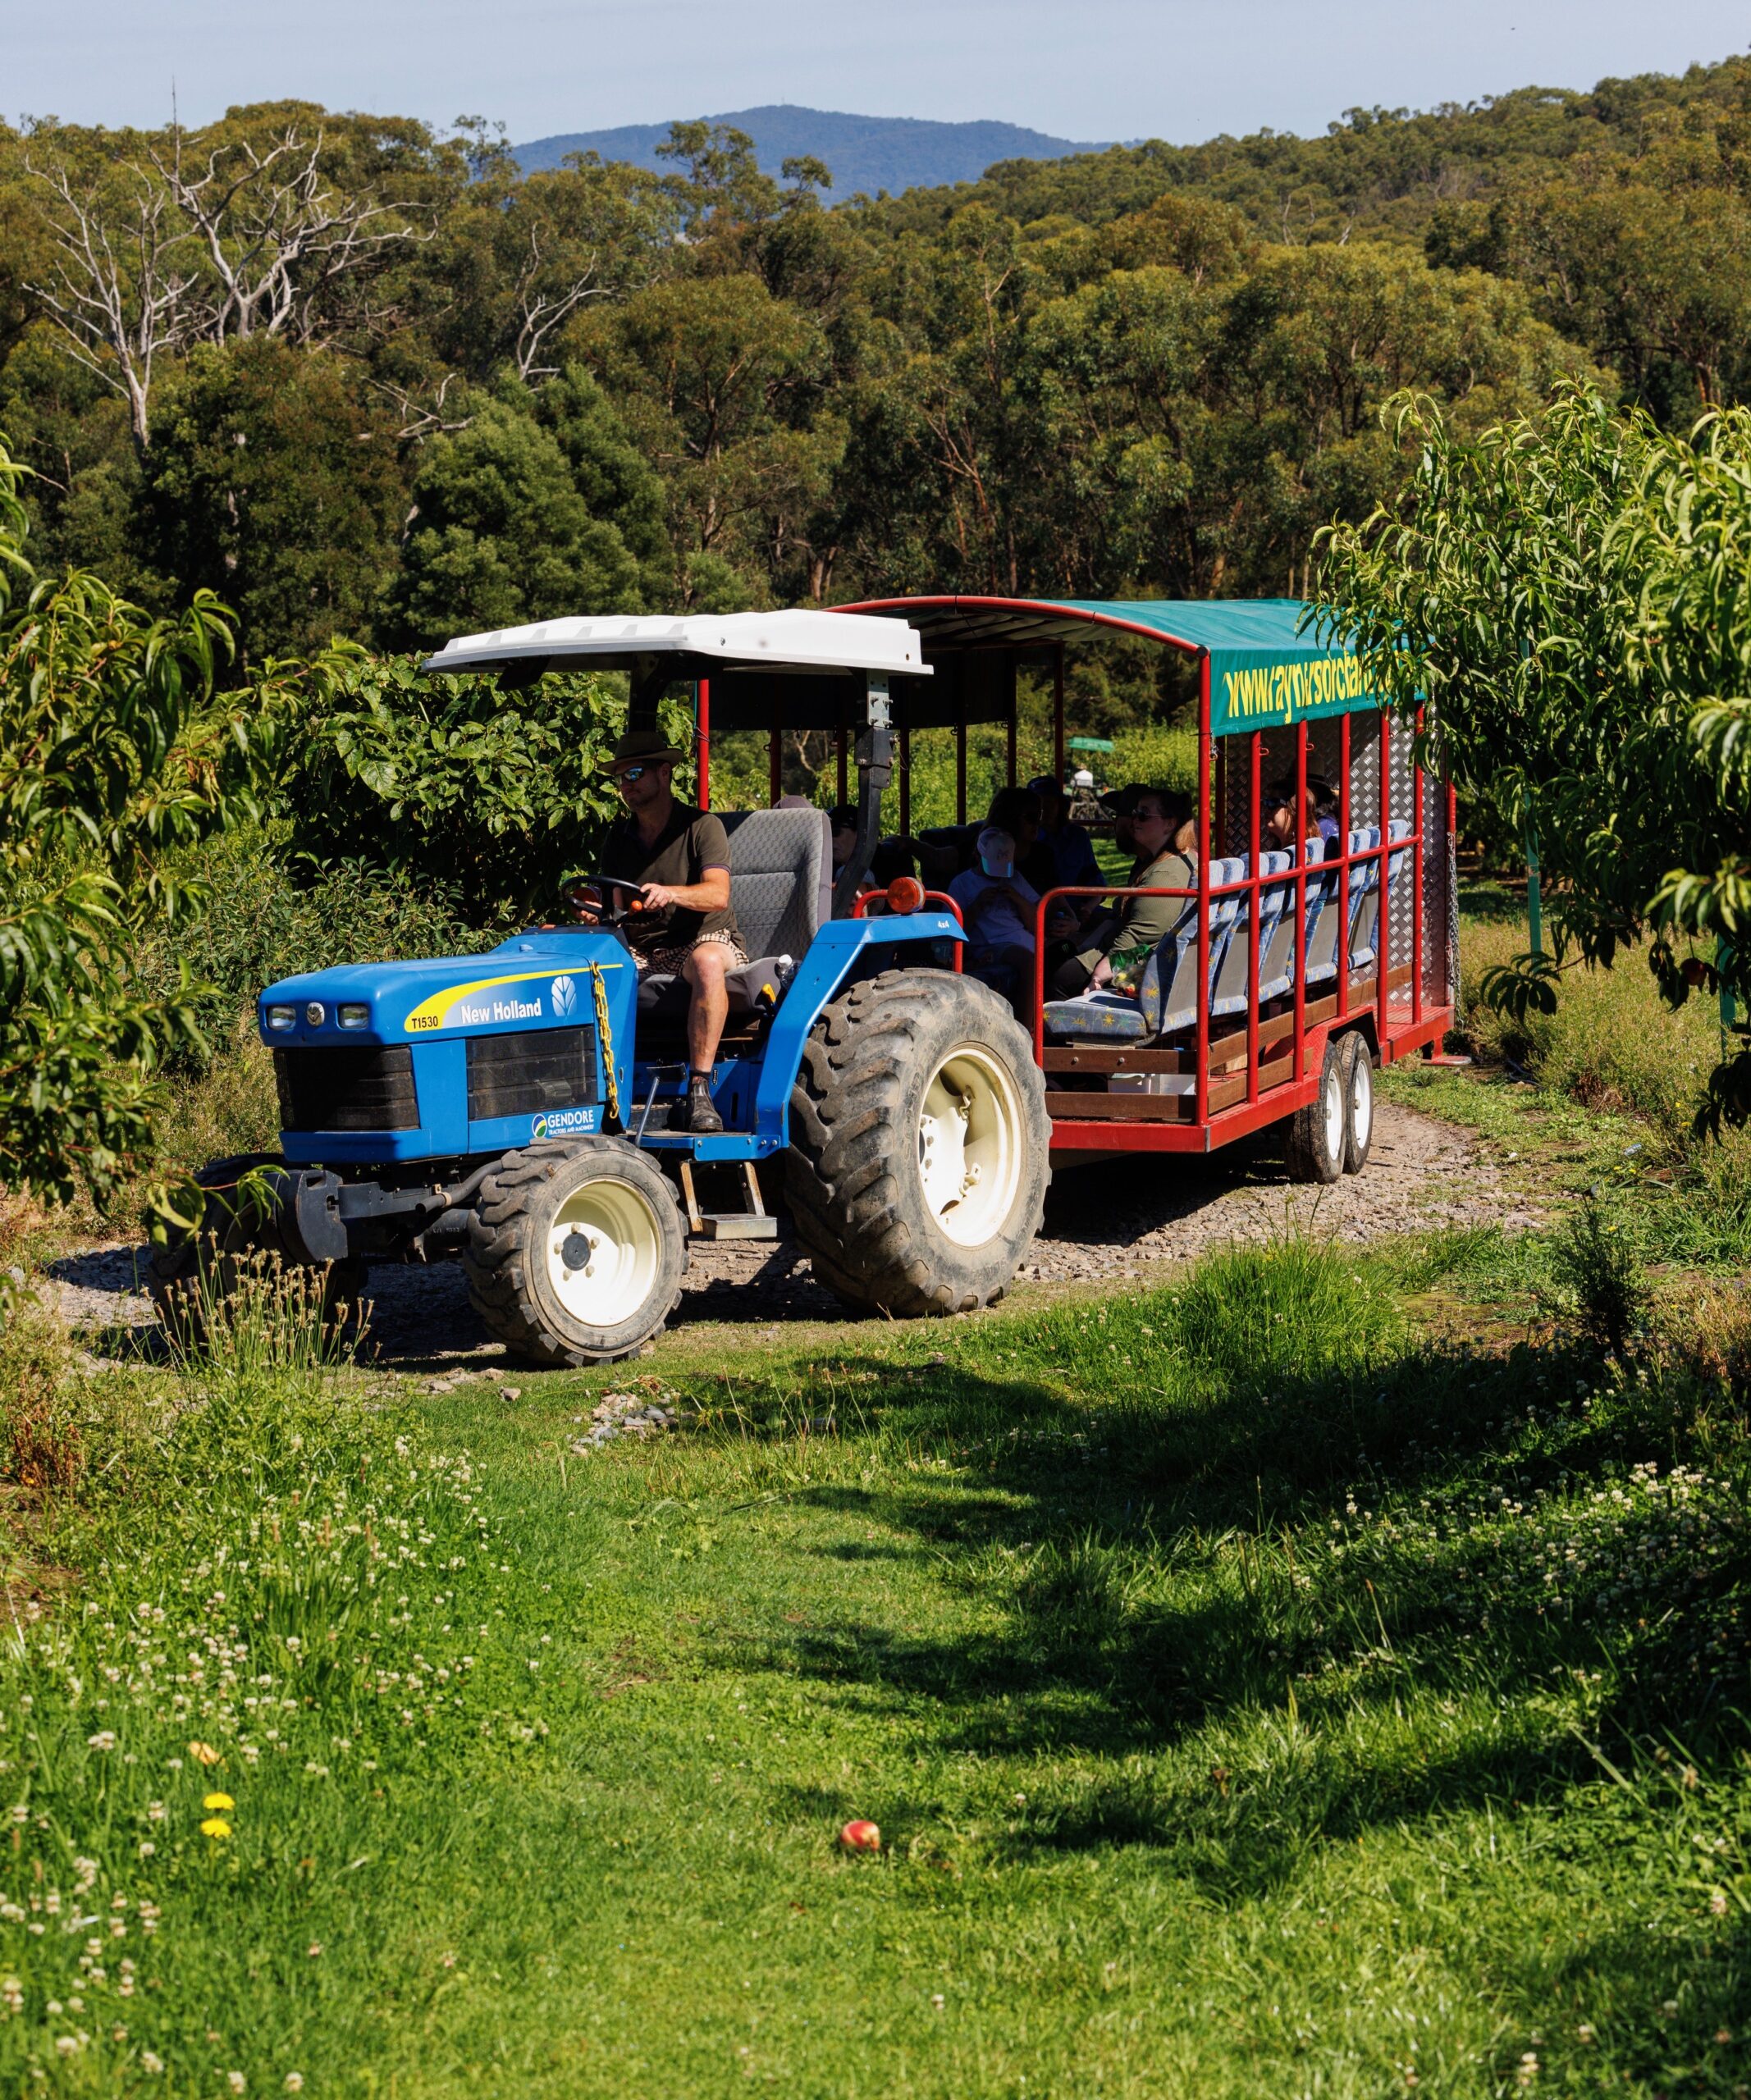 Yarra Valley Fruit Picking tour with Wildlife or Wineries